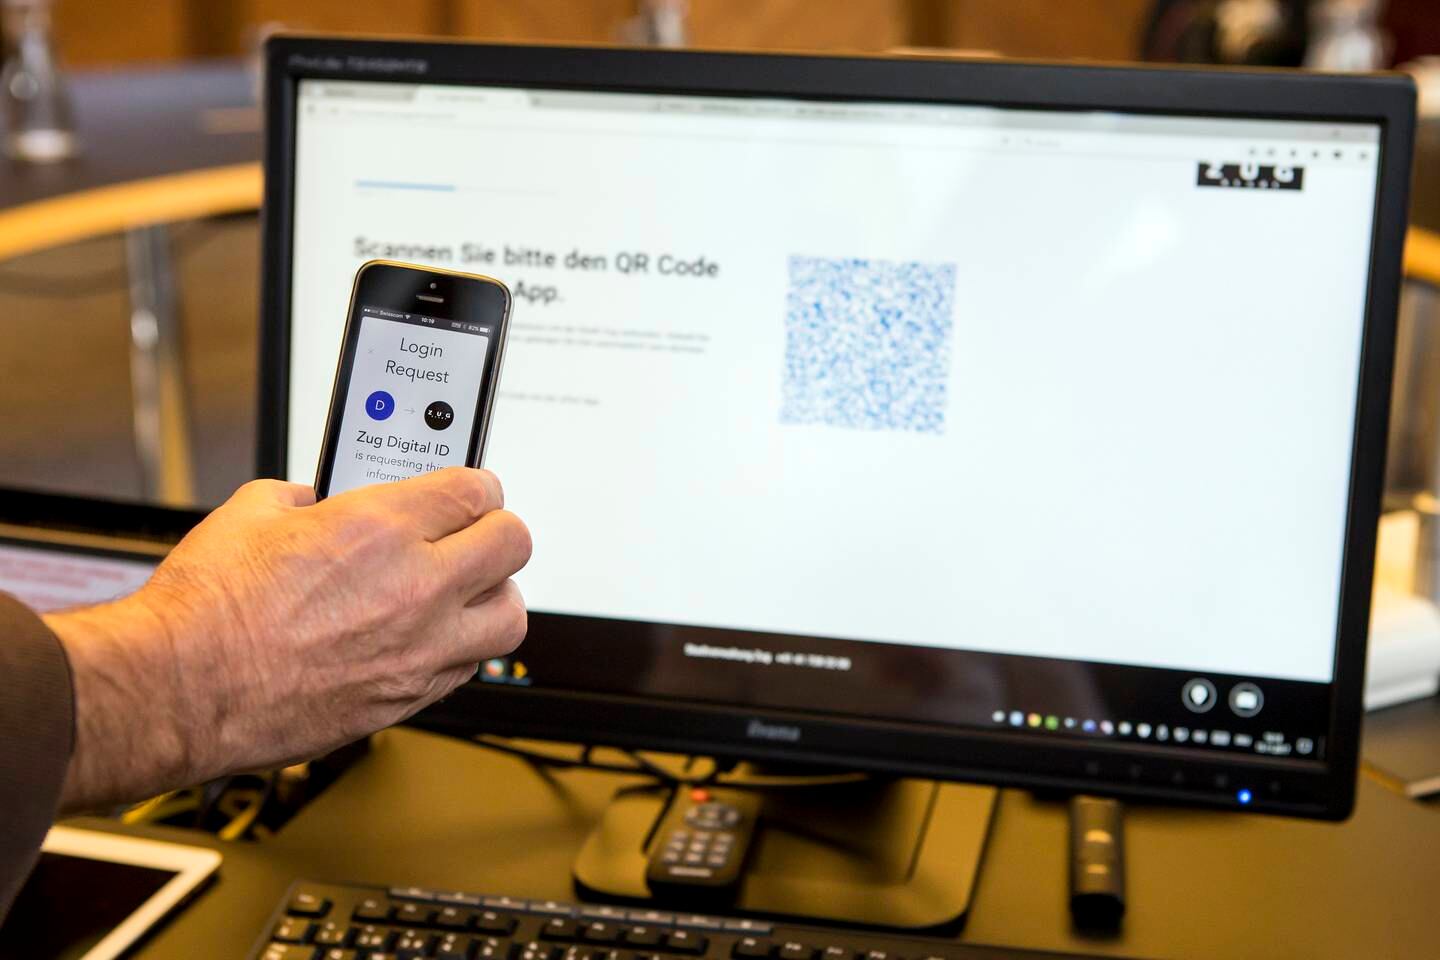 epa06330660 Mobile phone and computer screens are shown during a blockchain-based digital identity demonstration in Zug, Switzerland, November 15, 2017. The city of Zug is now offering all residents the opportunity to obtain a digital identity. It is based on an app and linked to the Ethereum blockchain. EPA/Alexandra Way